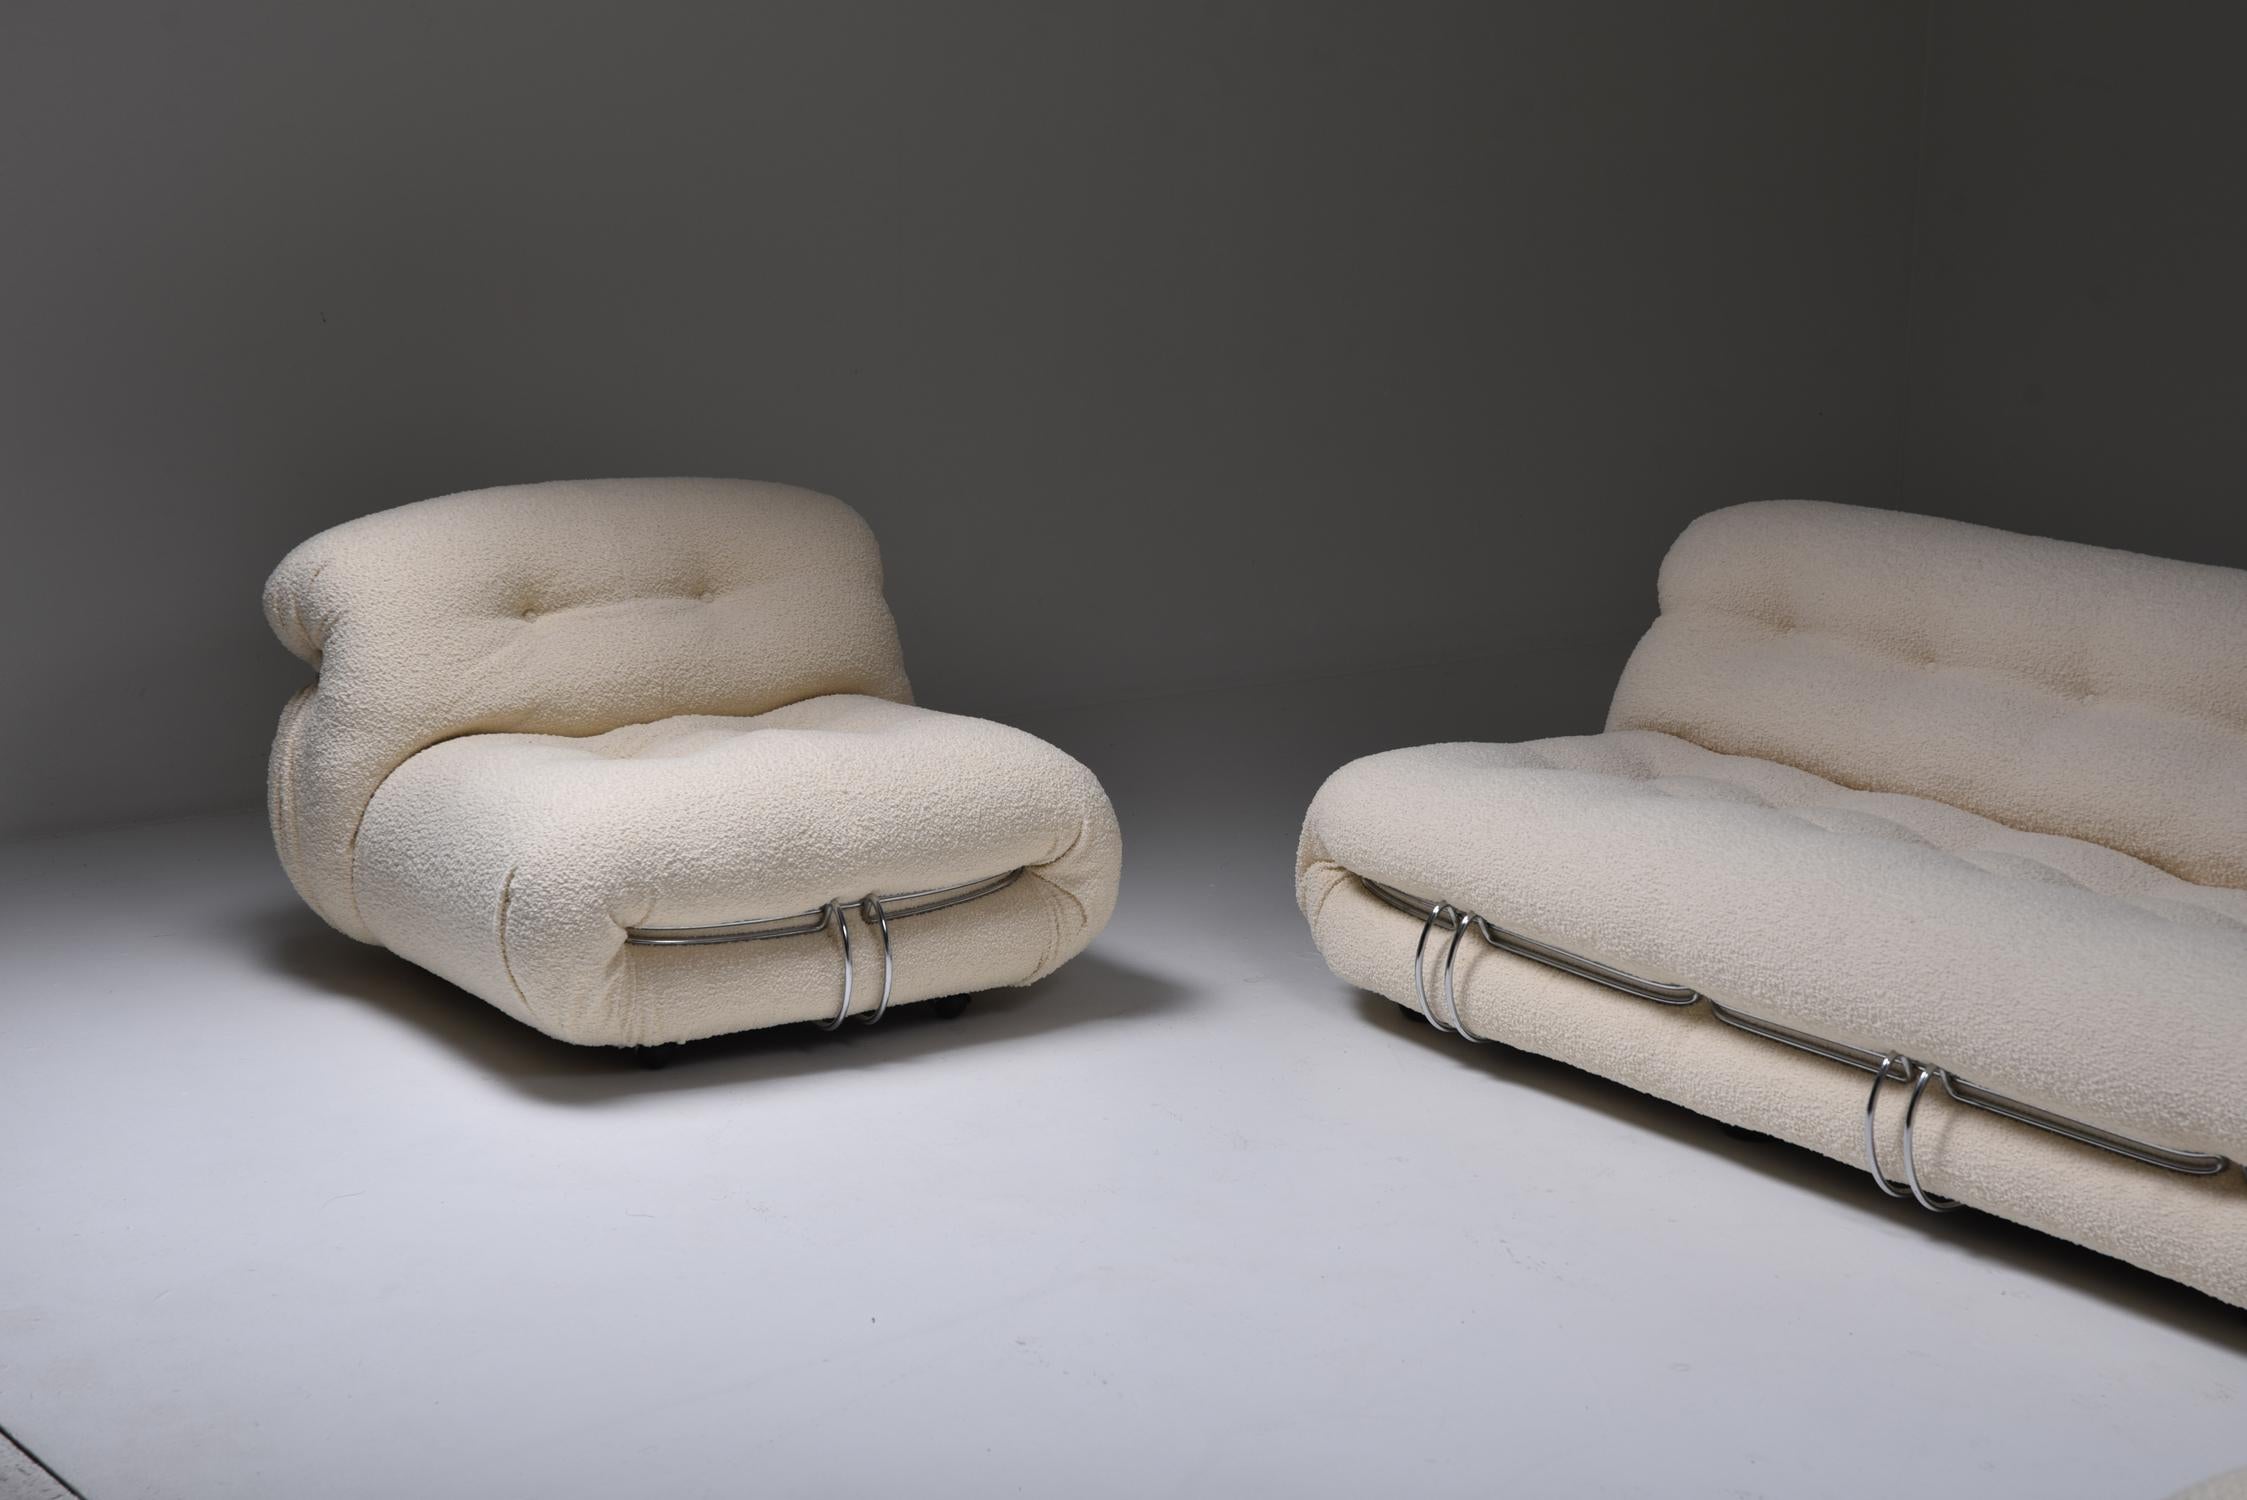 Cassina 'Soriana' Four-Seater Sofa by Afra and Tobia Scarpa in Bouclé, 1970's For Sale 2